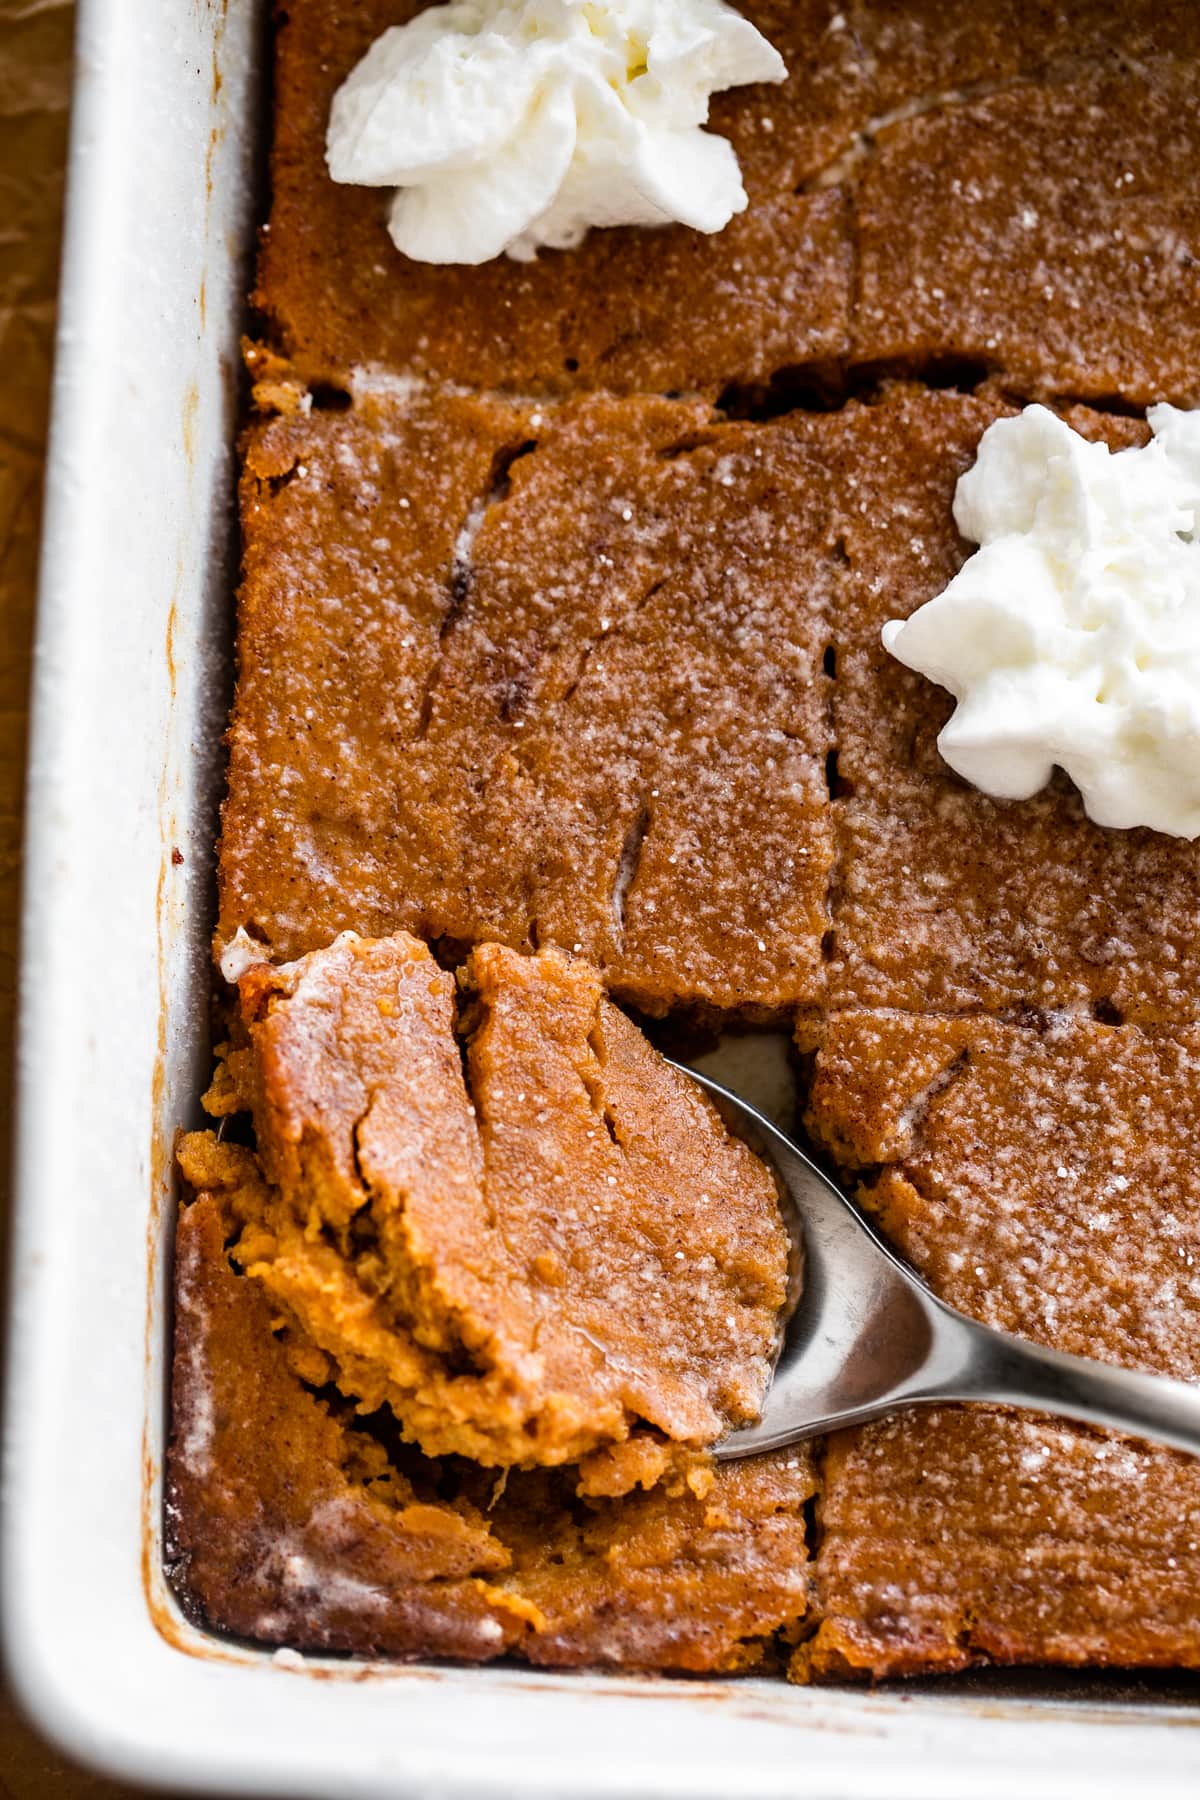 Spooning out Pumpkin Bars with a spoon from a baking dish.